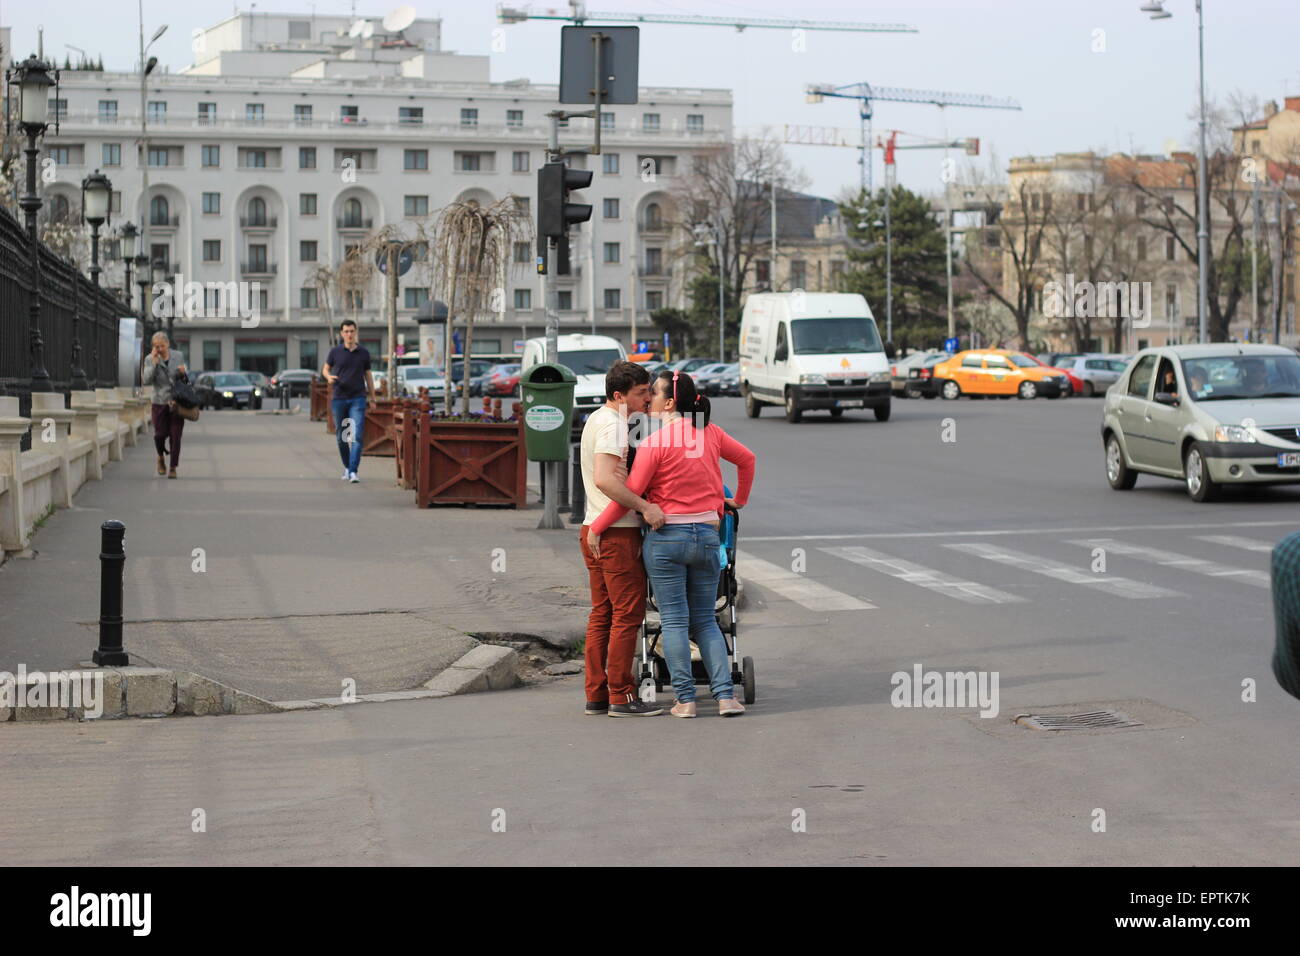 A Couple with a baby kissing on the side of the road, Bucharest, Romania Stock Photo